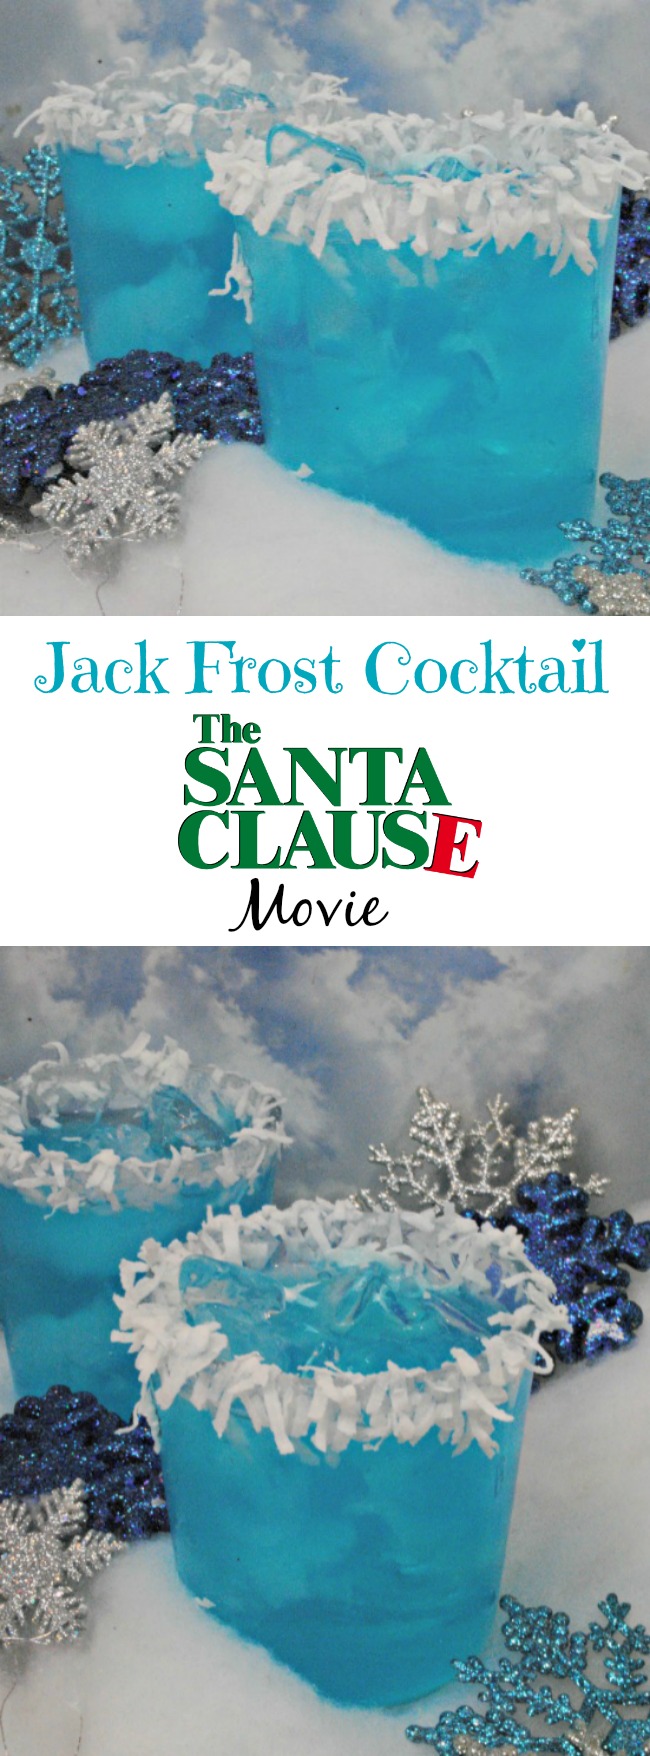 Jack Frost Cocktail Recipe (The Santa Clause movie) - Be Plum Crazy!